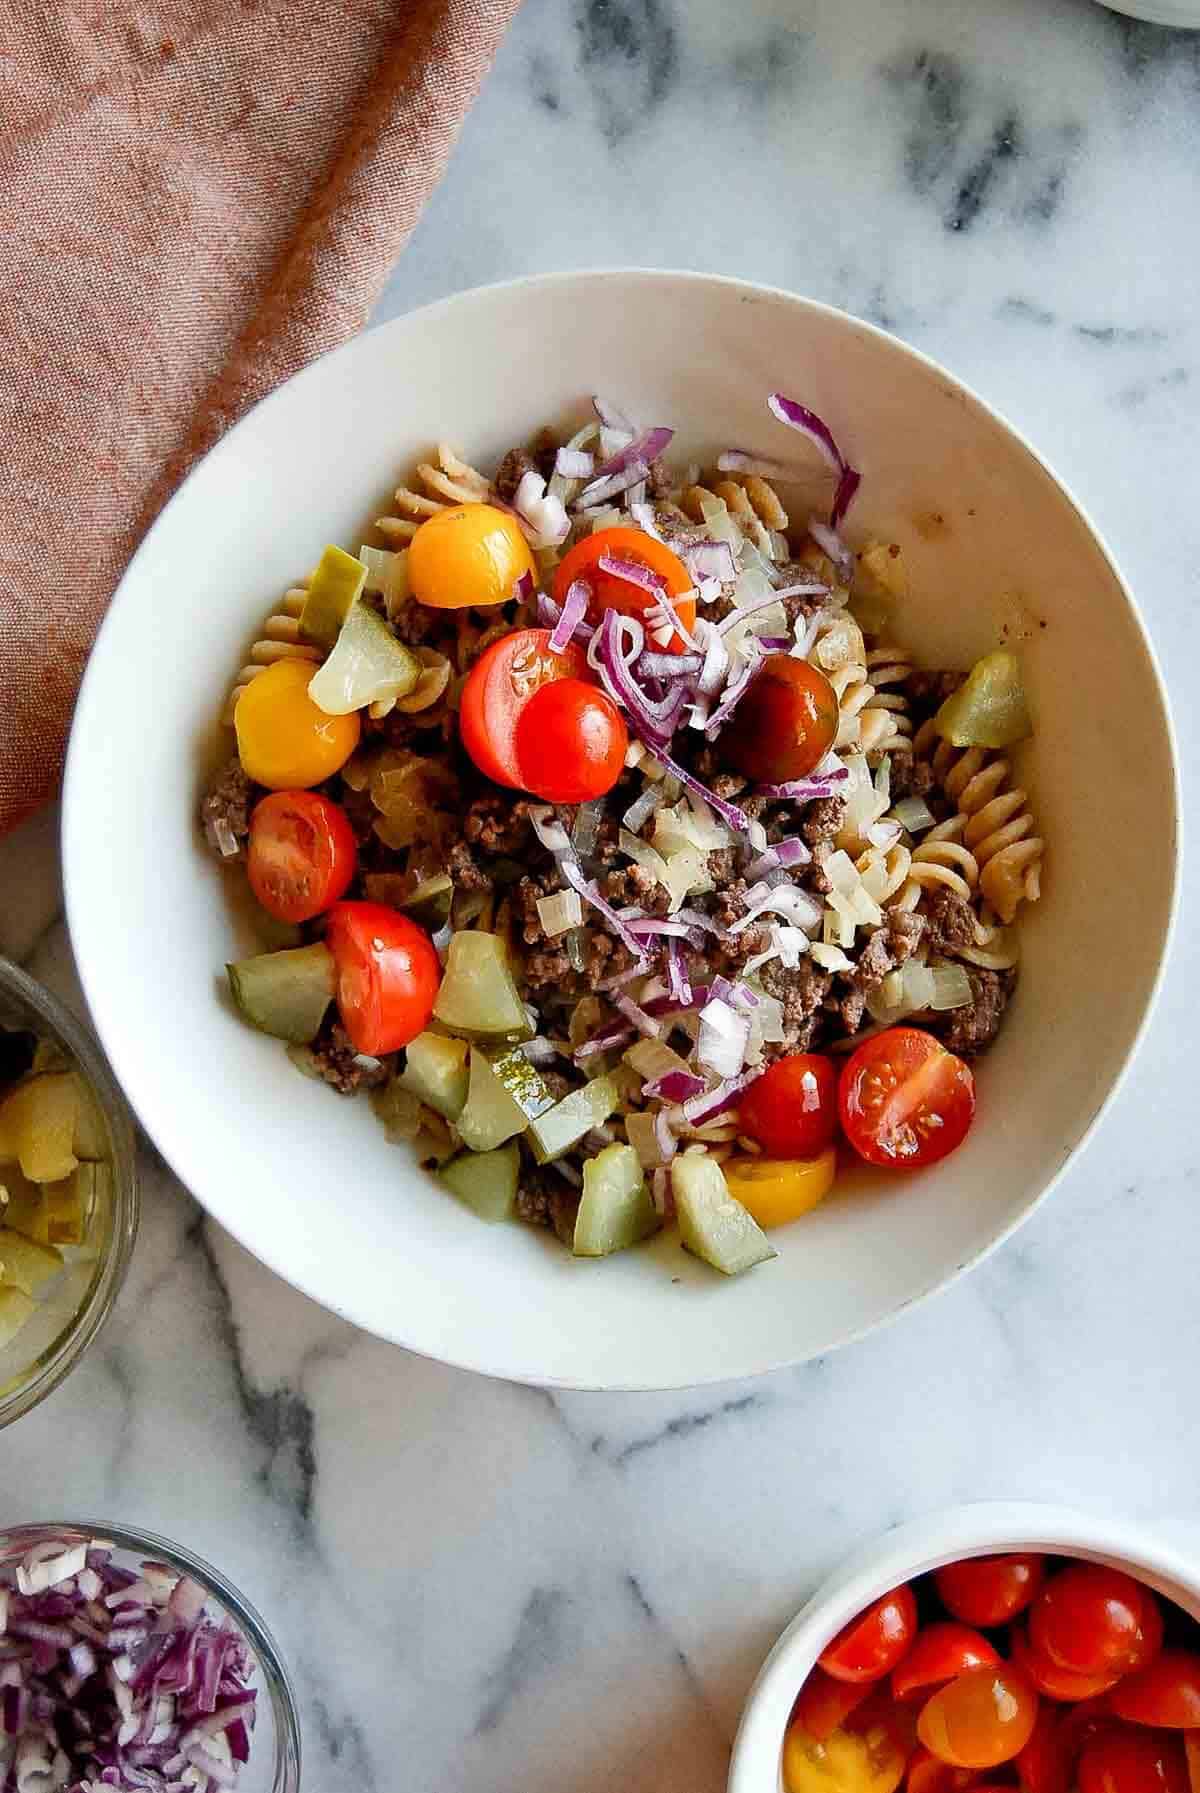 Whole wheat pasta salad with ground beef, tomatoes, onions and pickles in bowl.